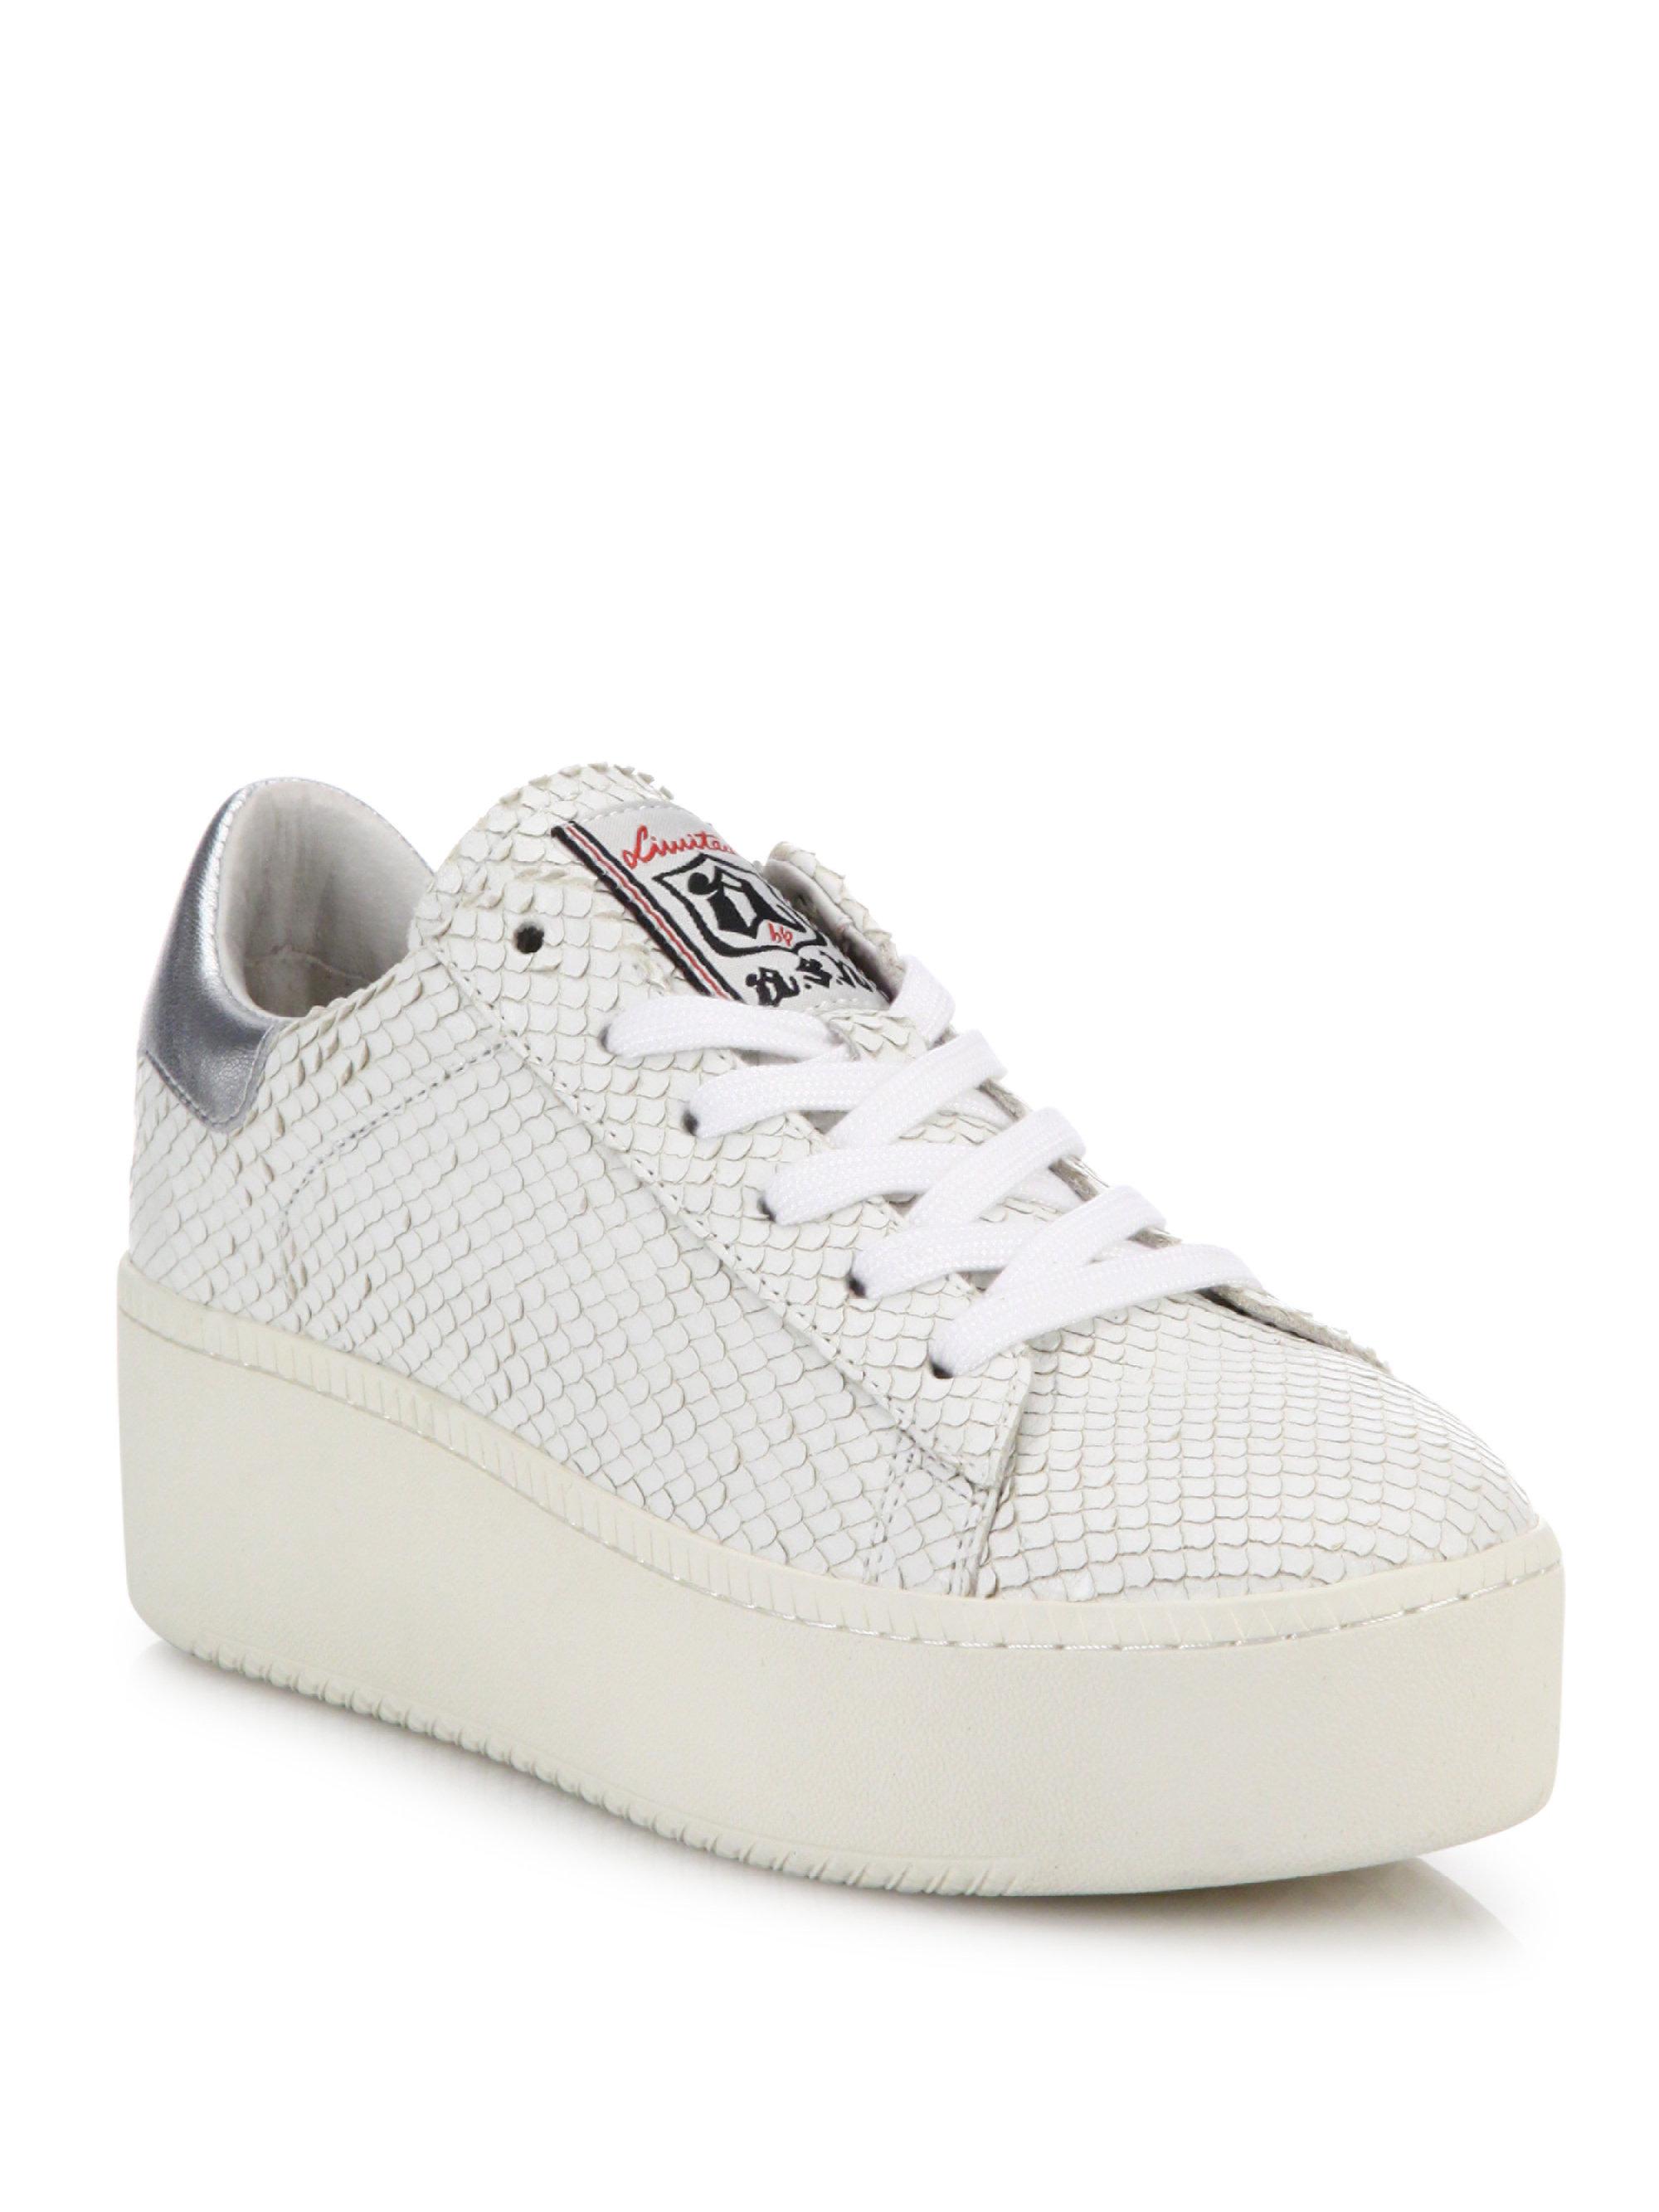 Lyst - Ash Cult Snake-embossed Leather Platform Sneakers in White for Men